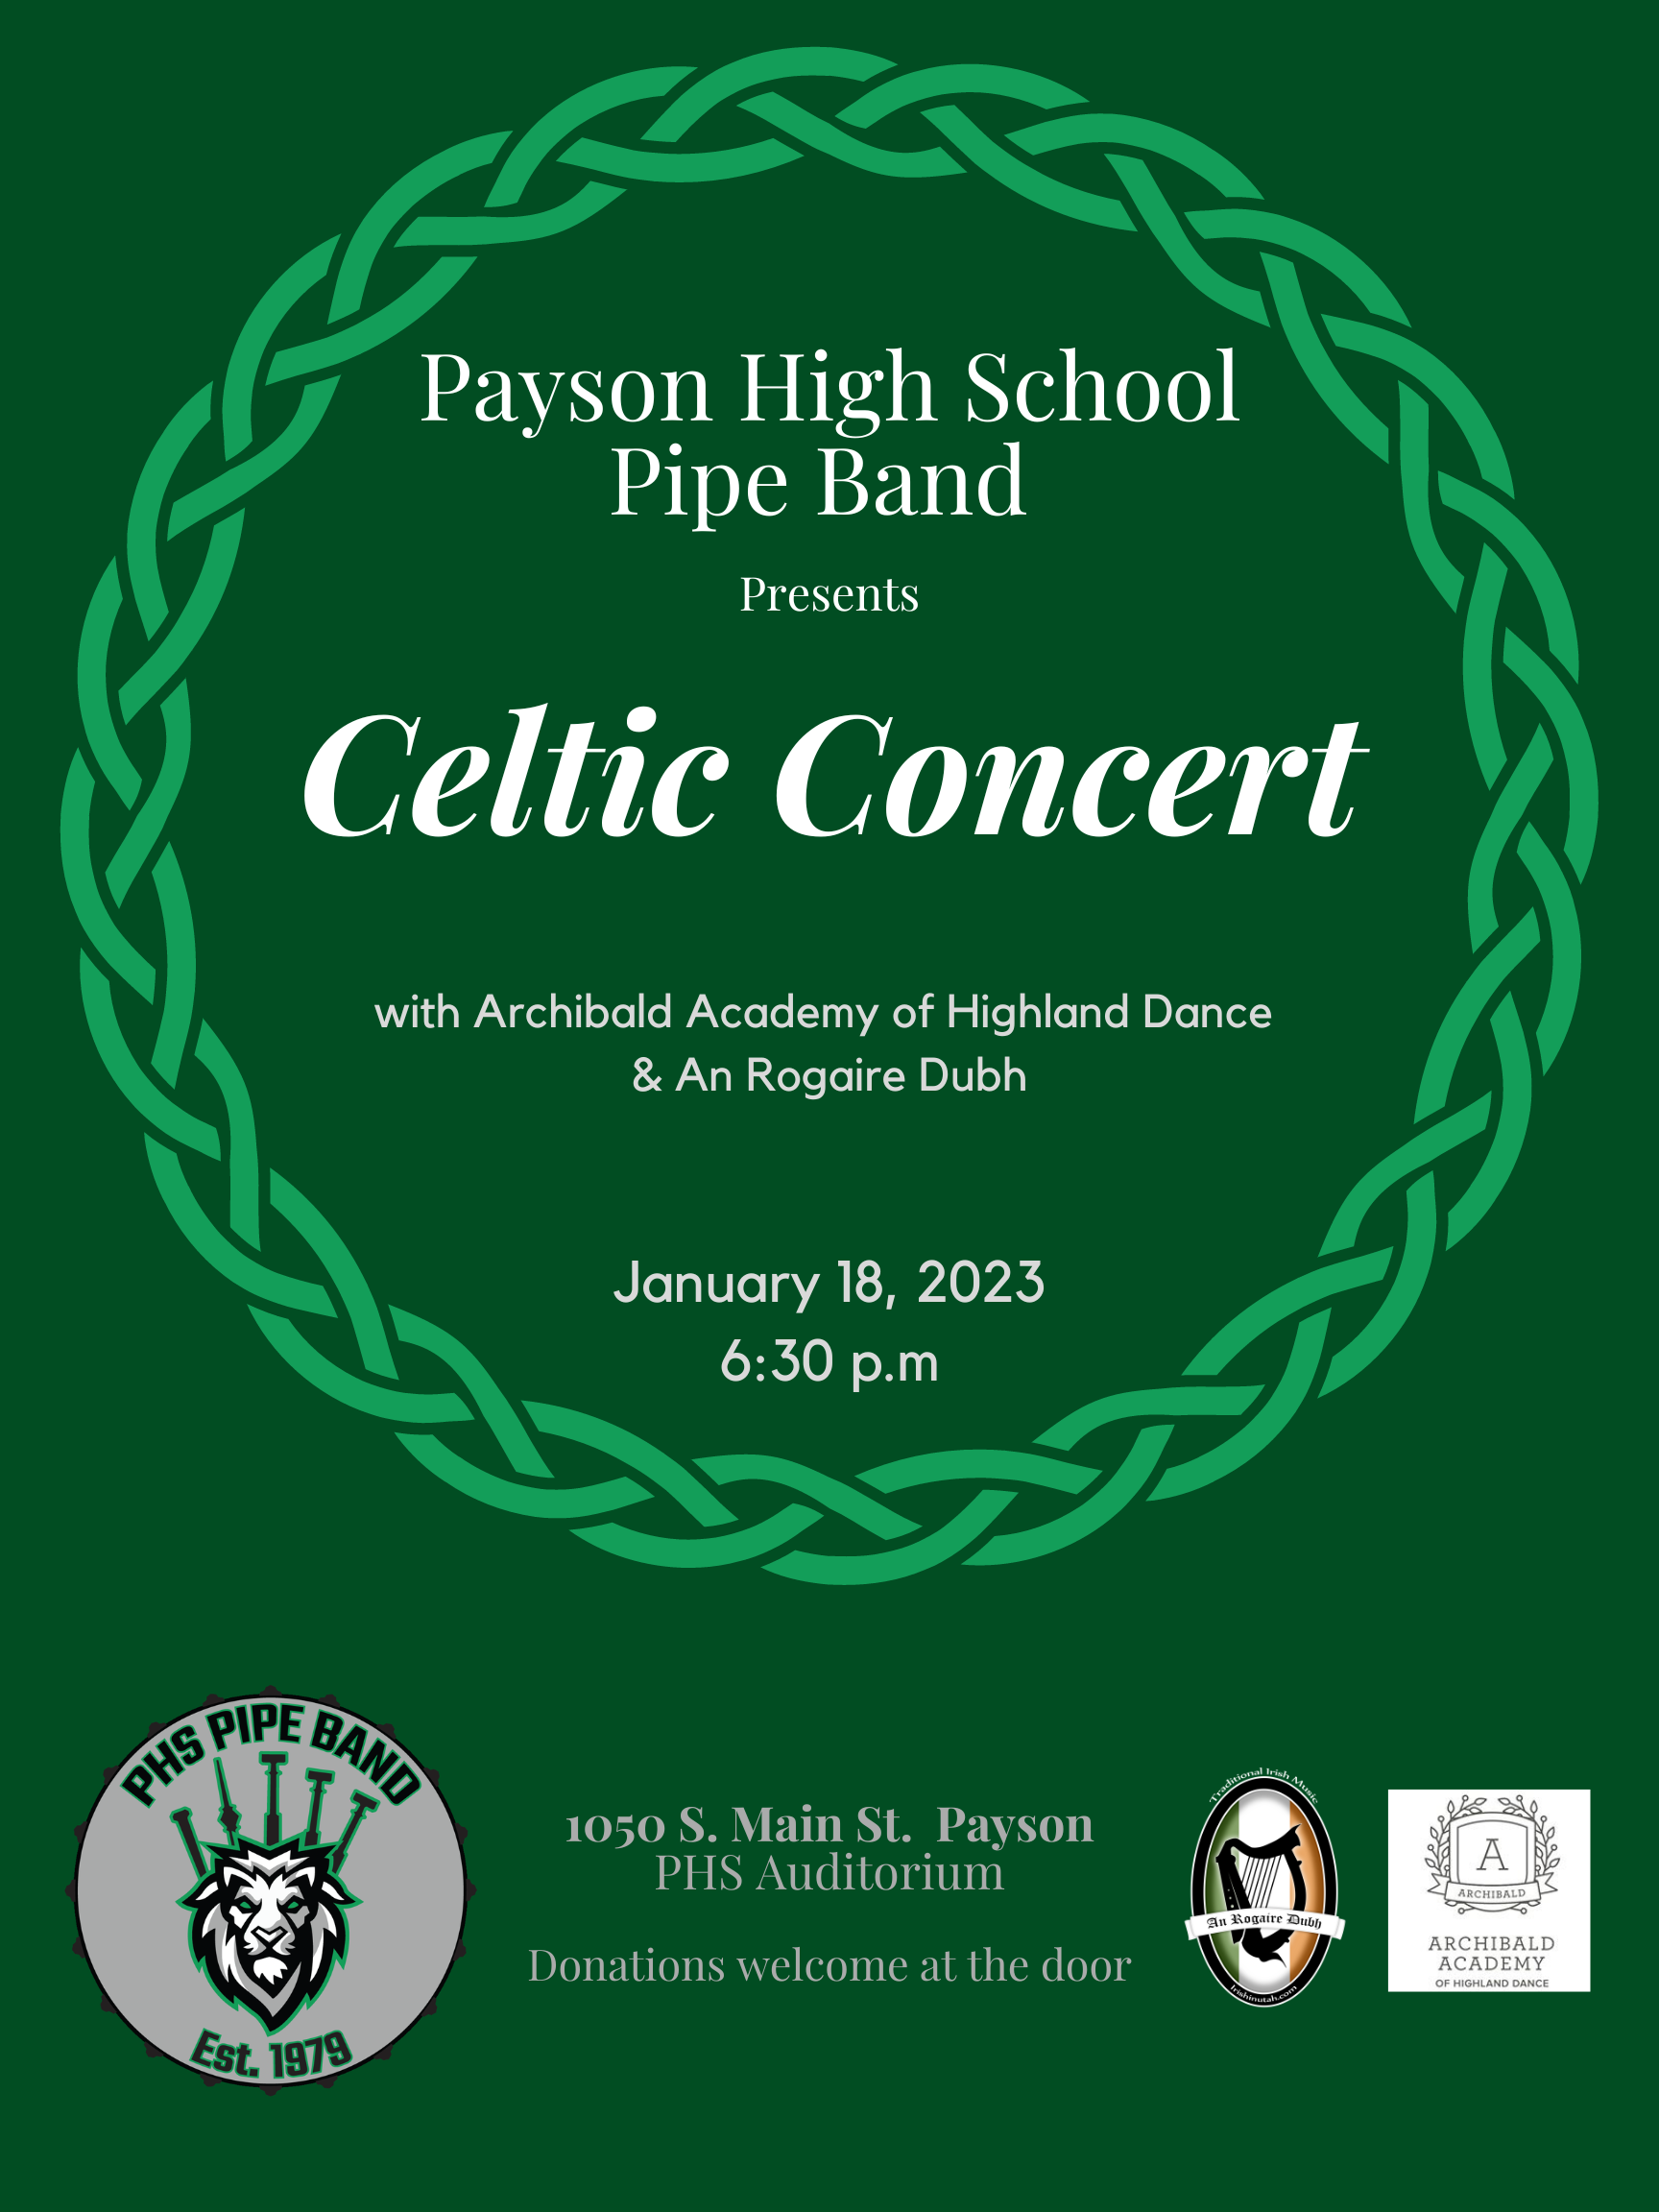 PHS Pipe Band Concert Jan. 18th 6:30 pm